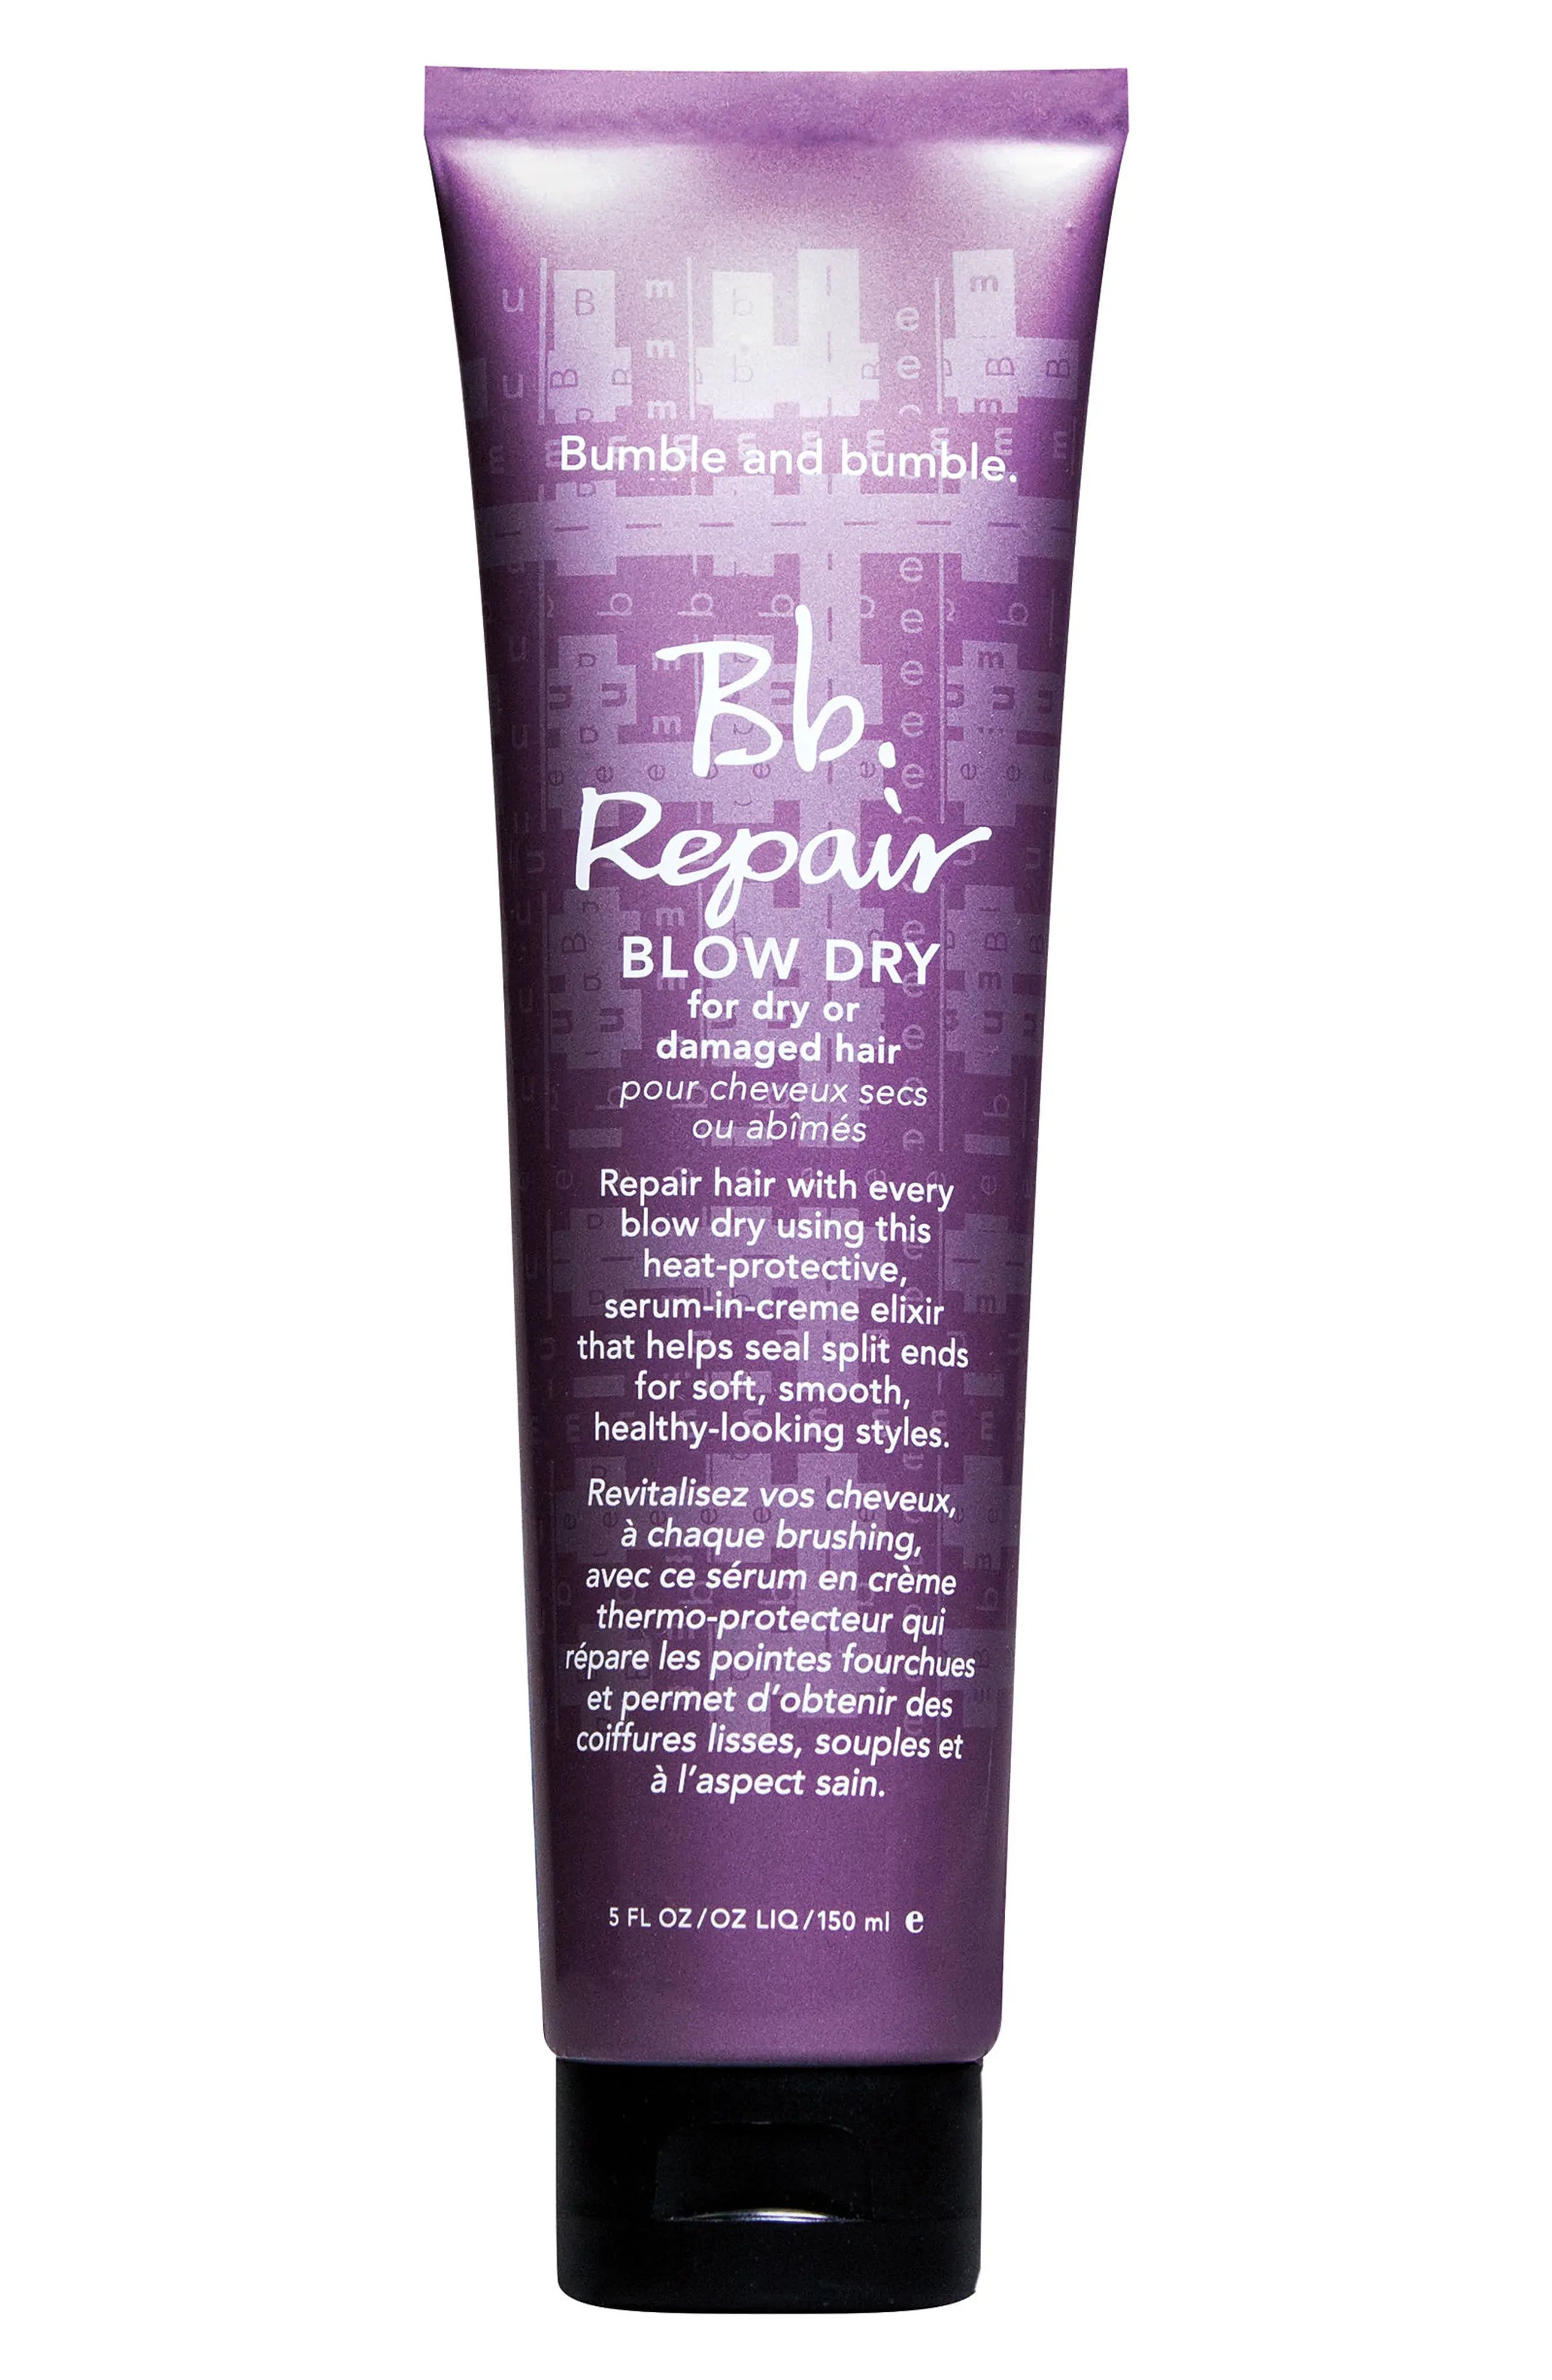 Bumble And Bumble. Repair Blow Dry, Size 5 oz | Nordstrom